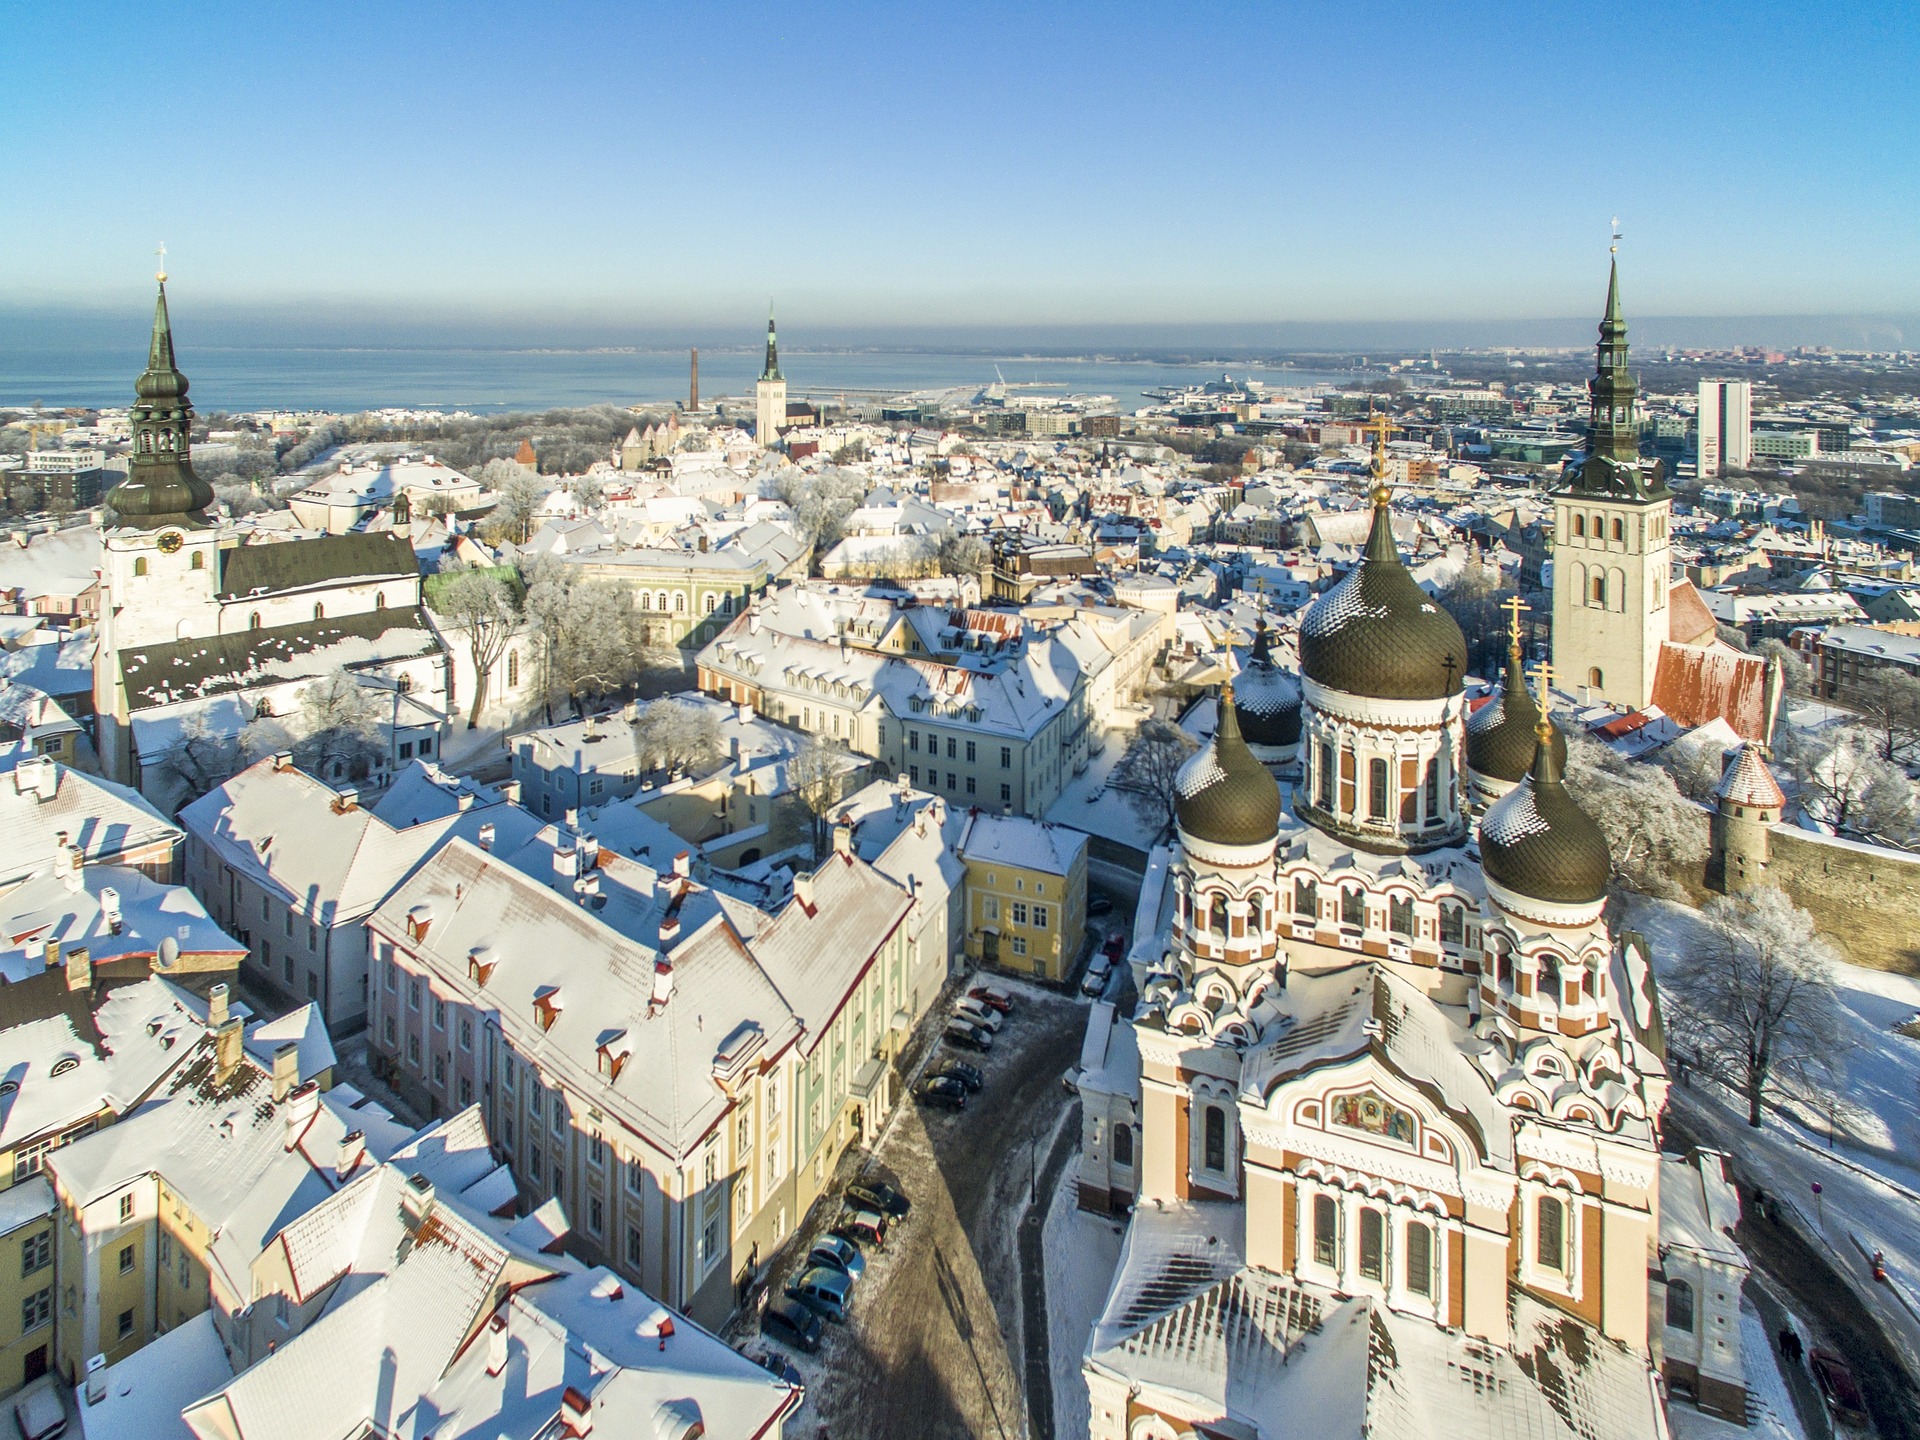 Talinn, the capital of Estonia, is absolutely marvelous during the winter.